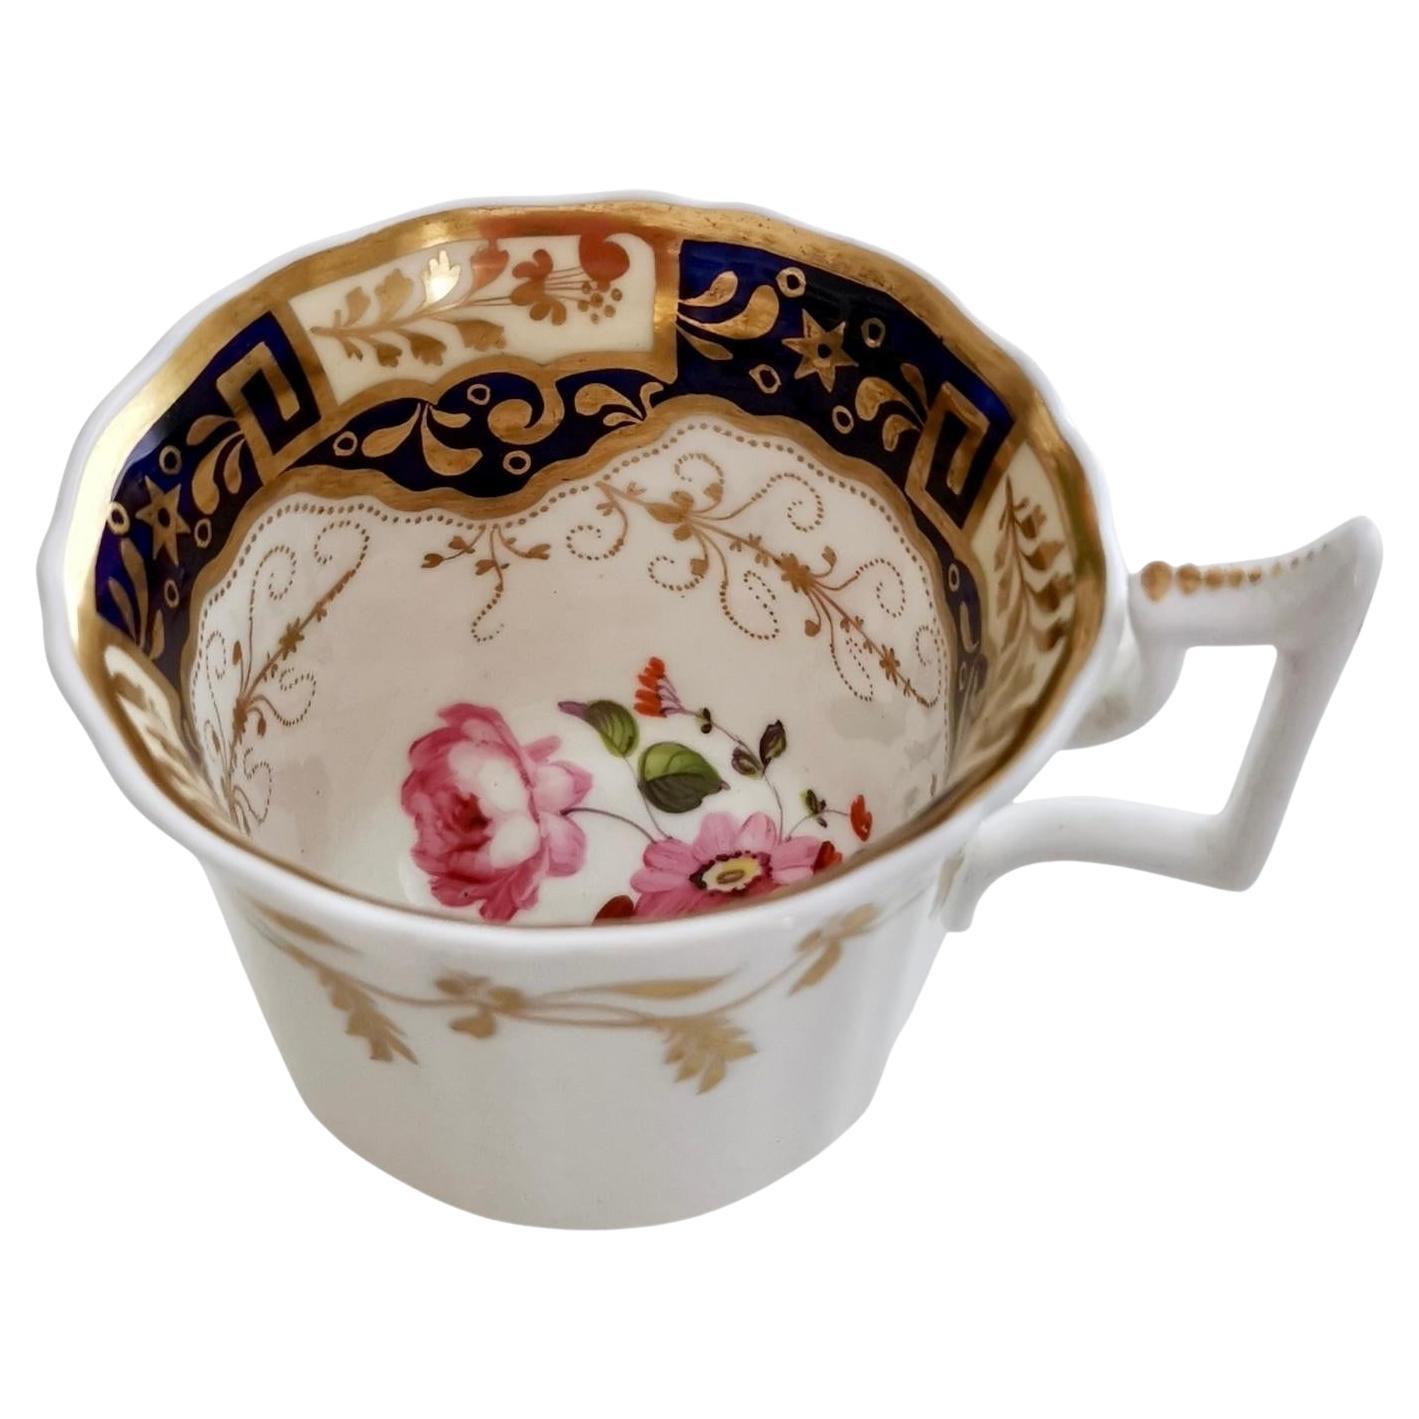 Yates Orphaned Coffee Cup, Cobalt Blue, Gilt and Flowers Patt.812, ca 1825